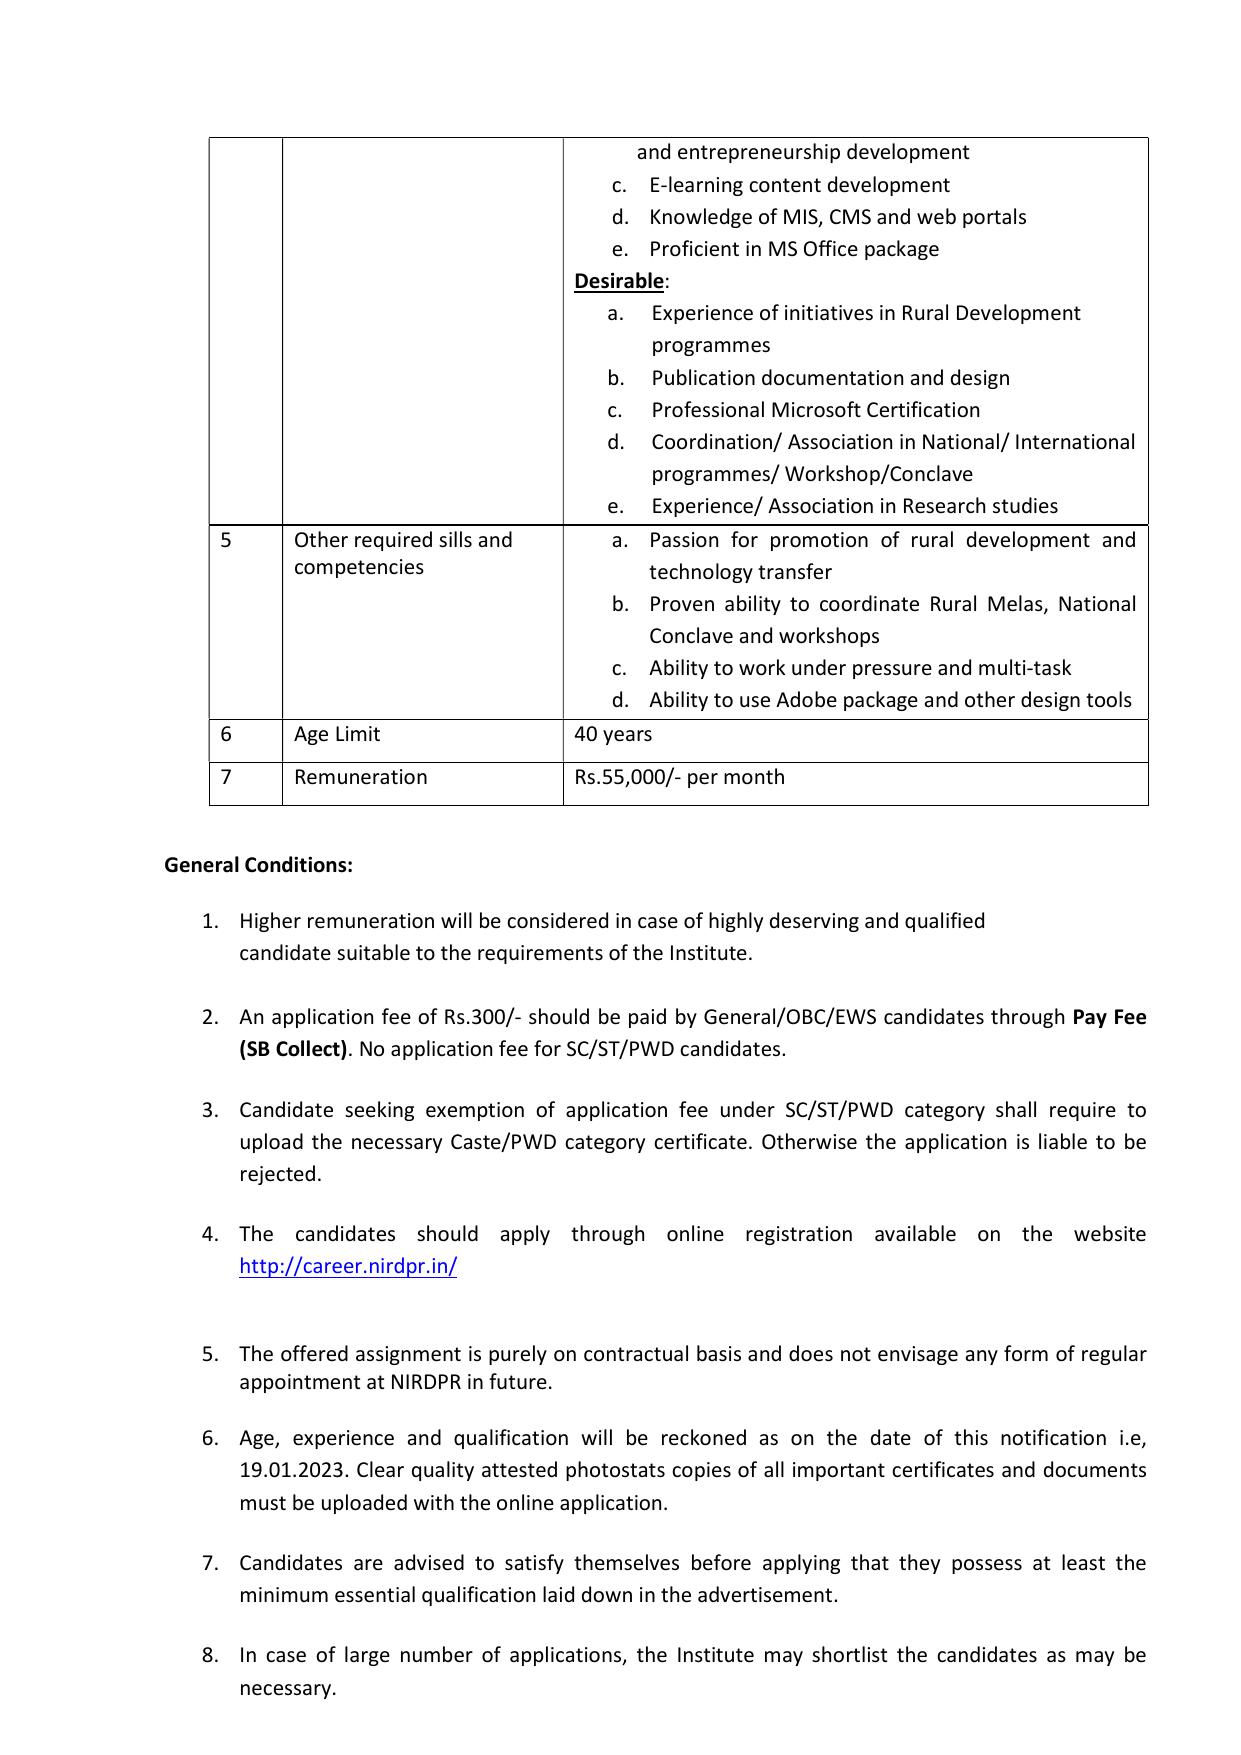 NIRDPR Invites Application for Young Professional, Junior Engineer Recruitment 2023 - Page 2